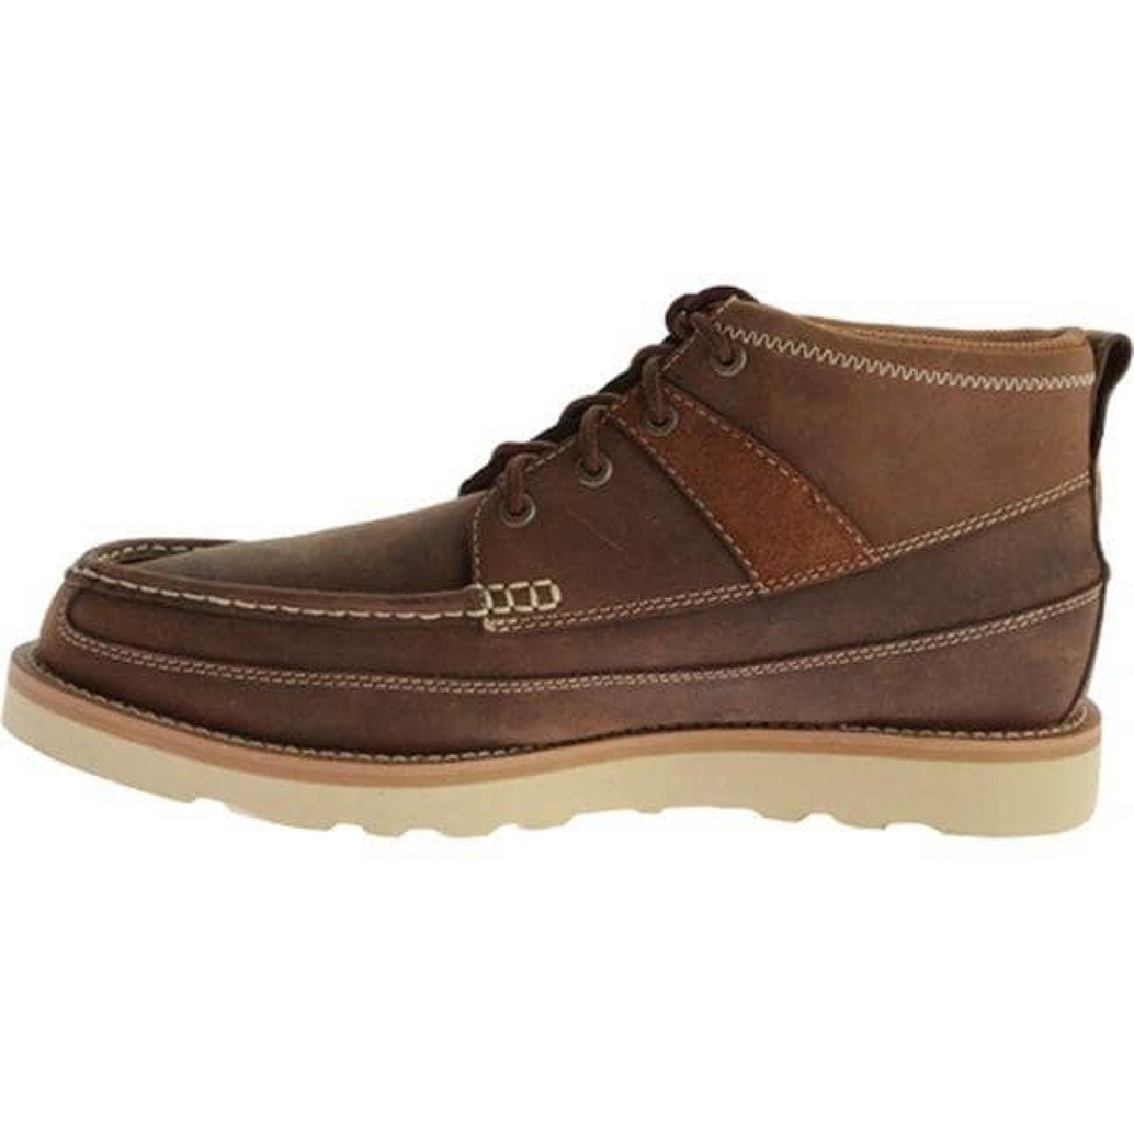 Twisted X Men's Wedge Sole Oiled Saddle Shoes | Casuals | Shoes | Shop ...